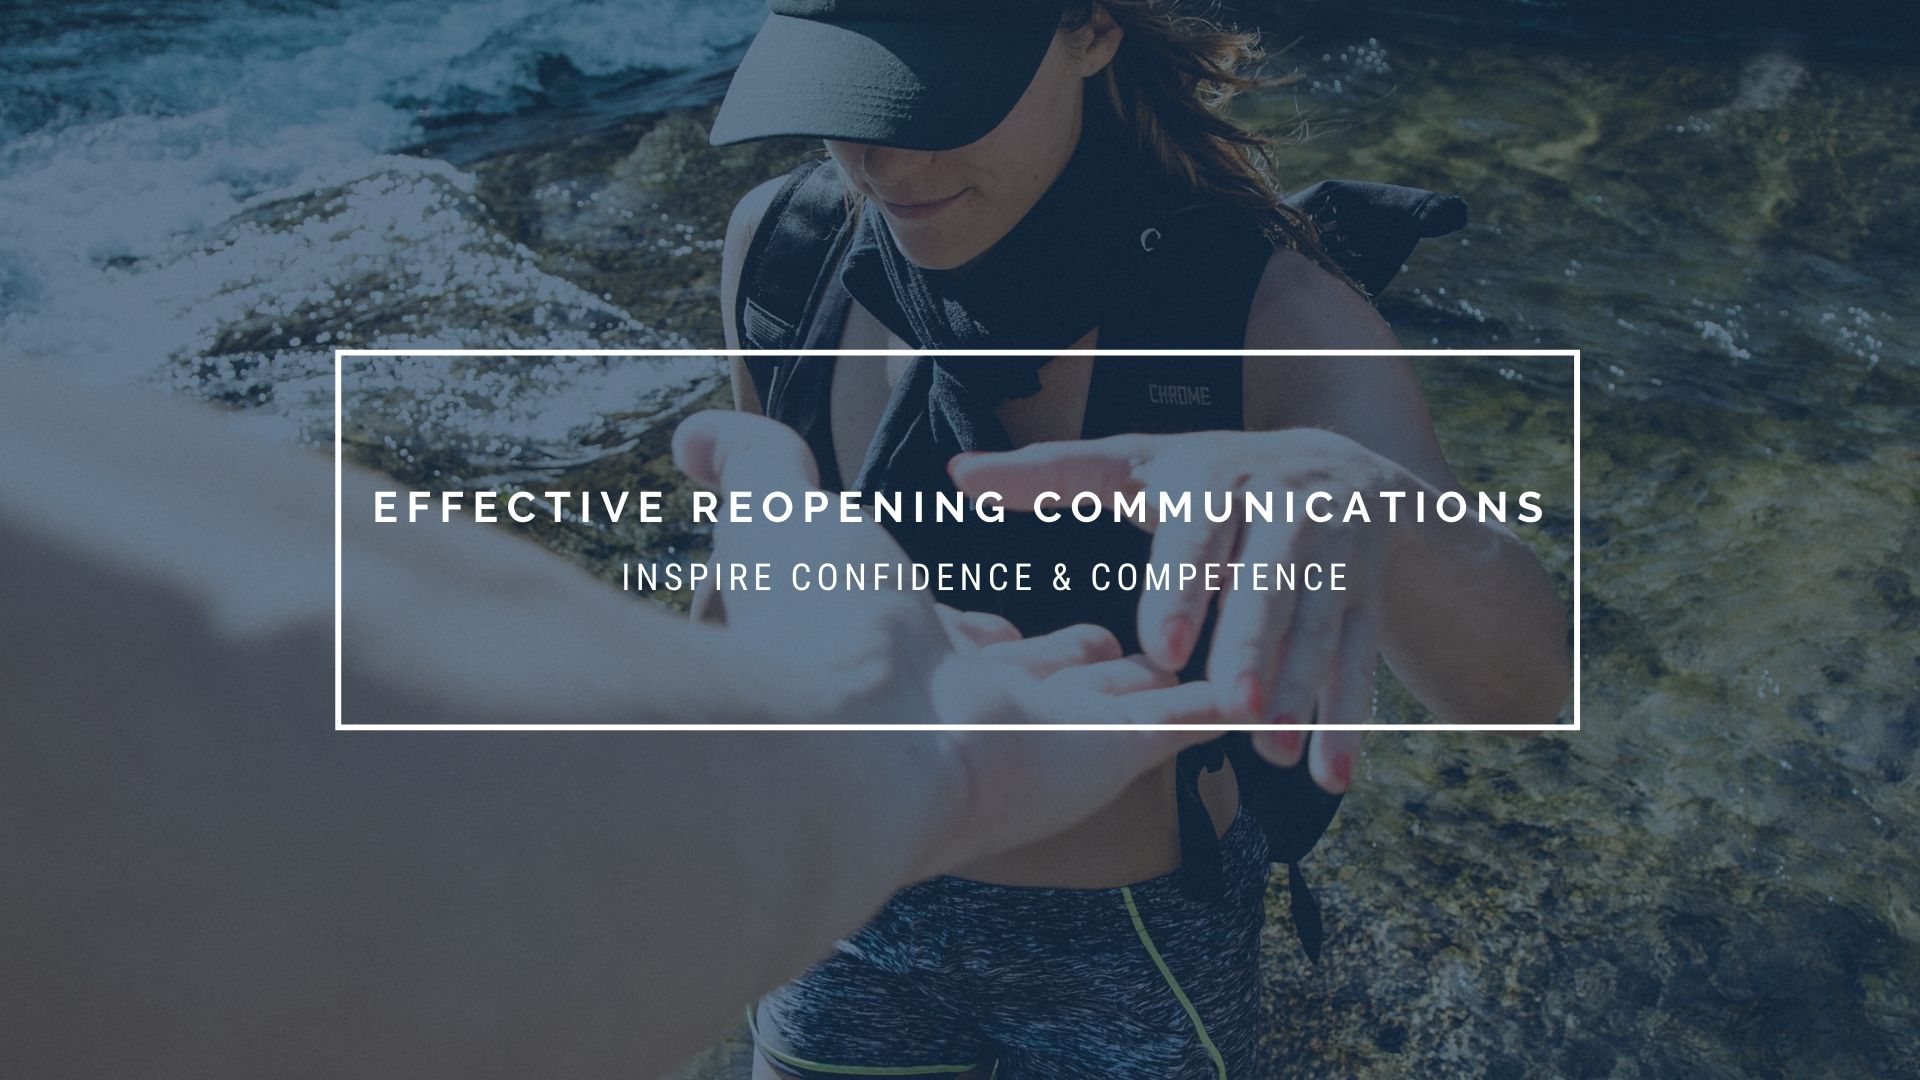 Effective Reopening Communications - Inspire Confidence & Competence